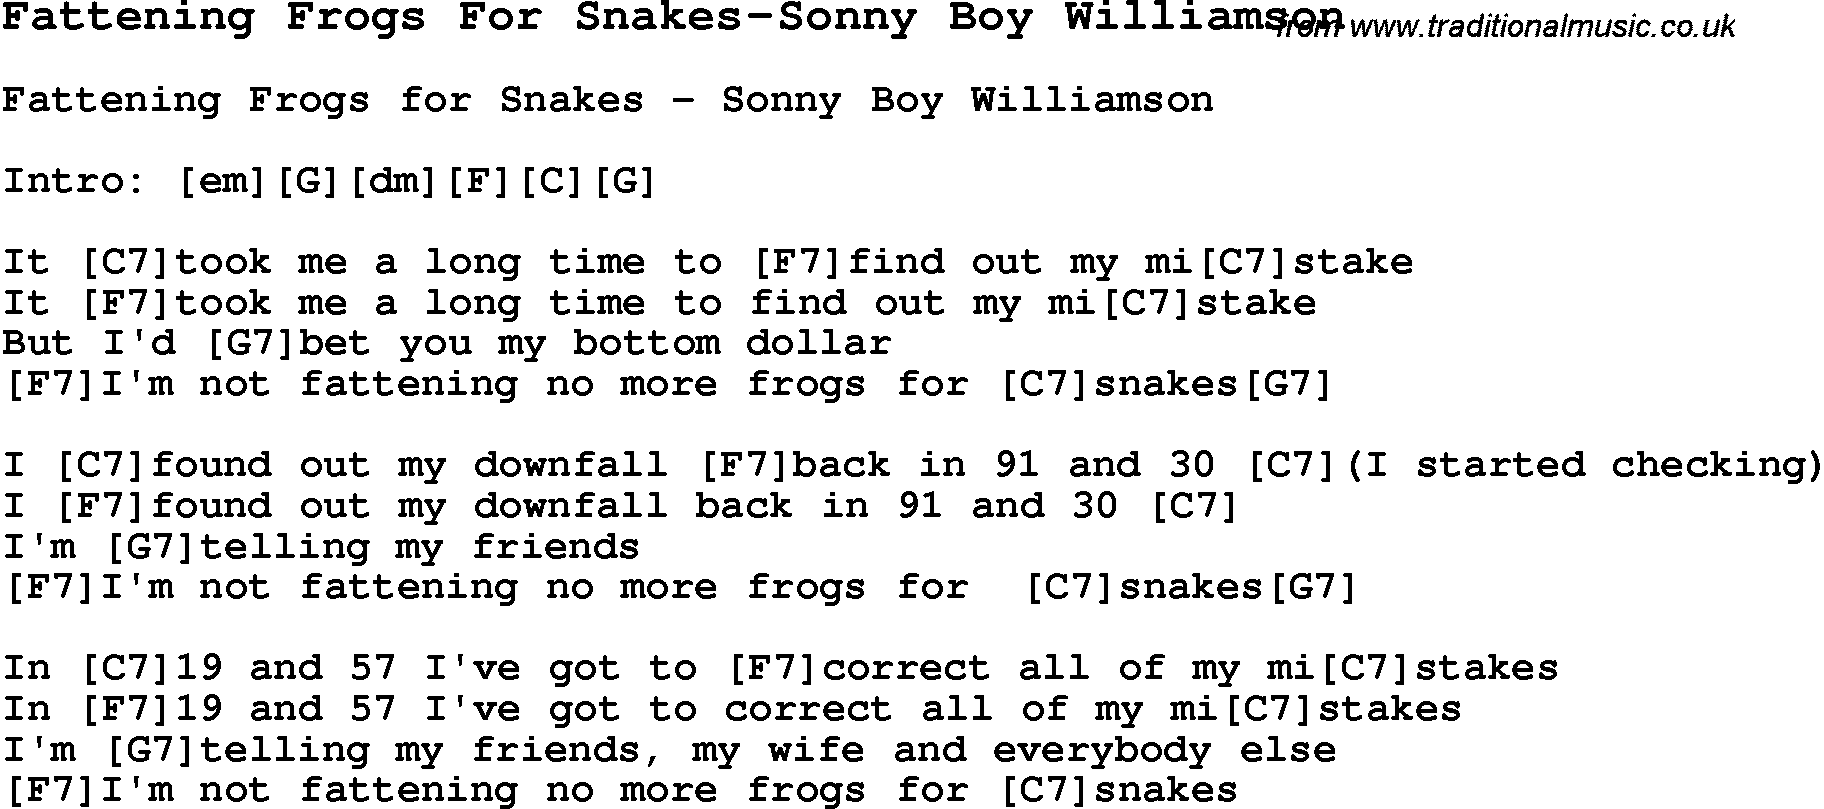 Blues Guitar Song, lyrics, chords, tablature, playing hints for Fattening Frogs For Snakes-Sonny Boy Williamson